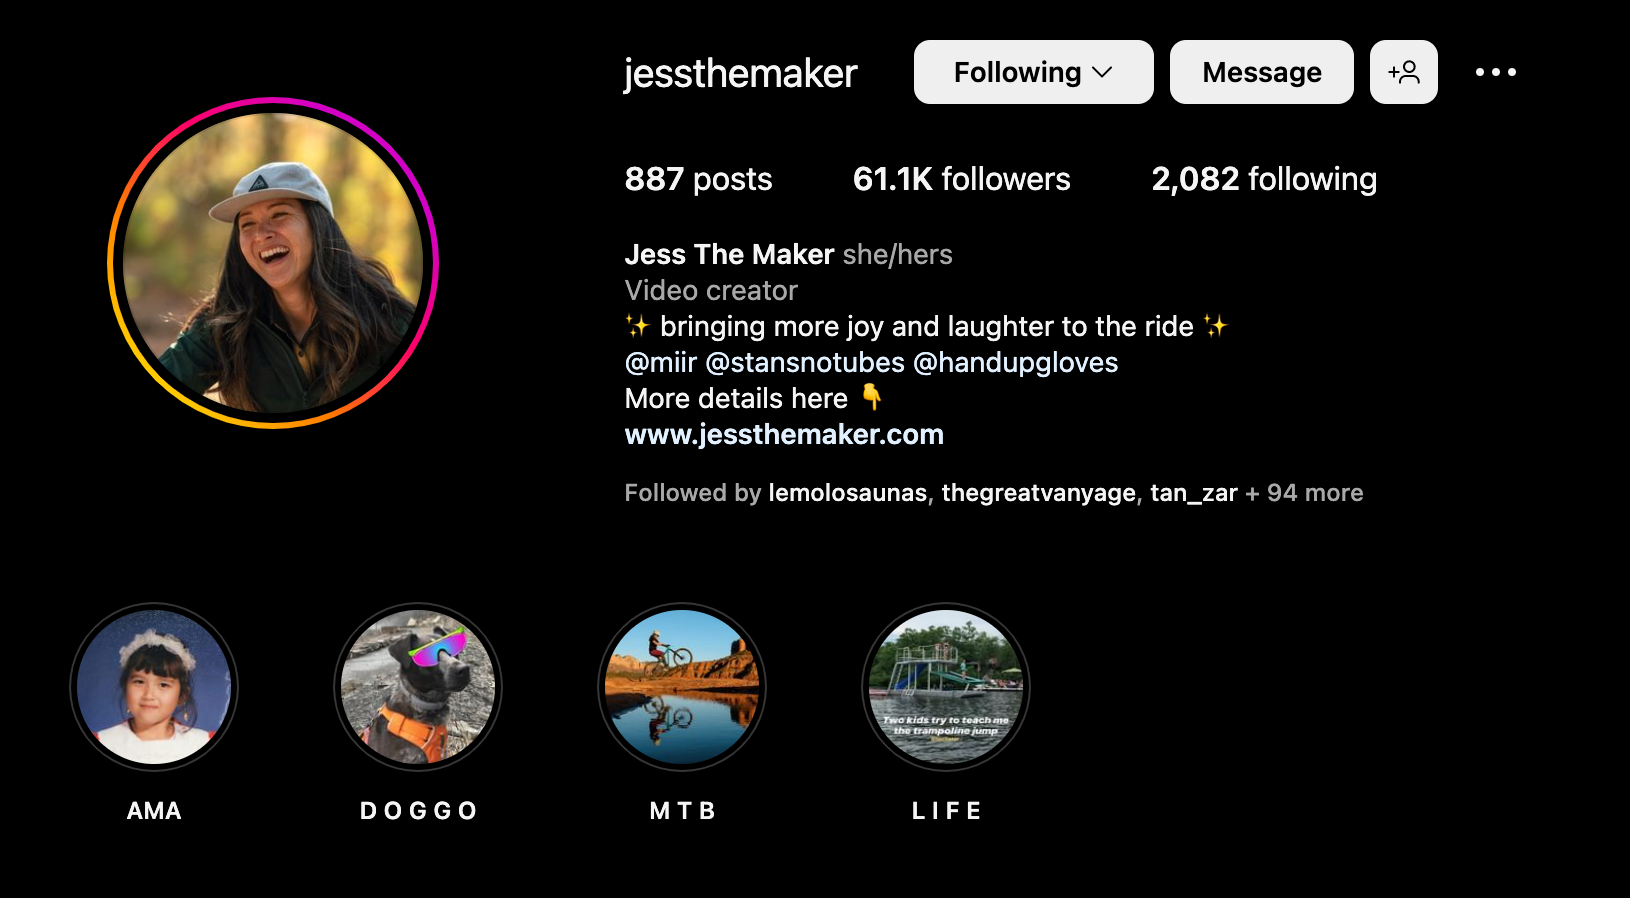 5 Awesome and Compelling People to Follow on Instagram